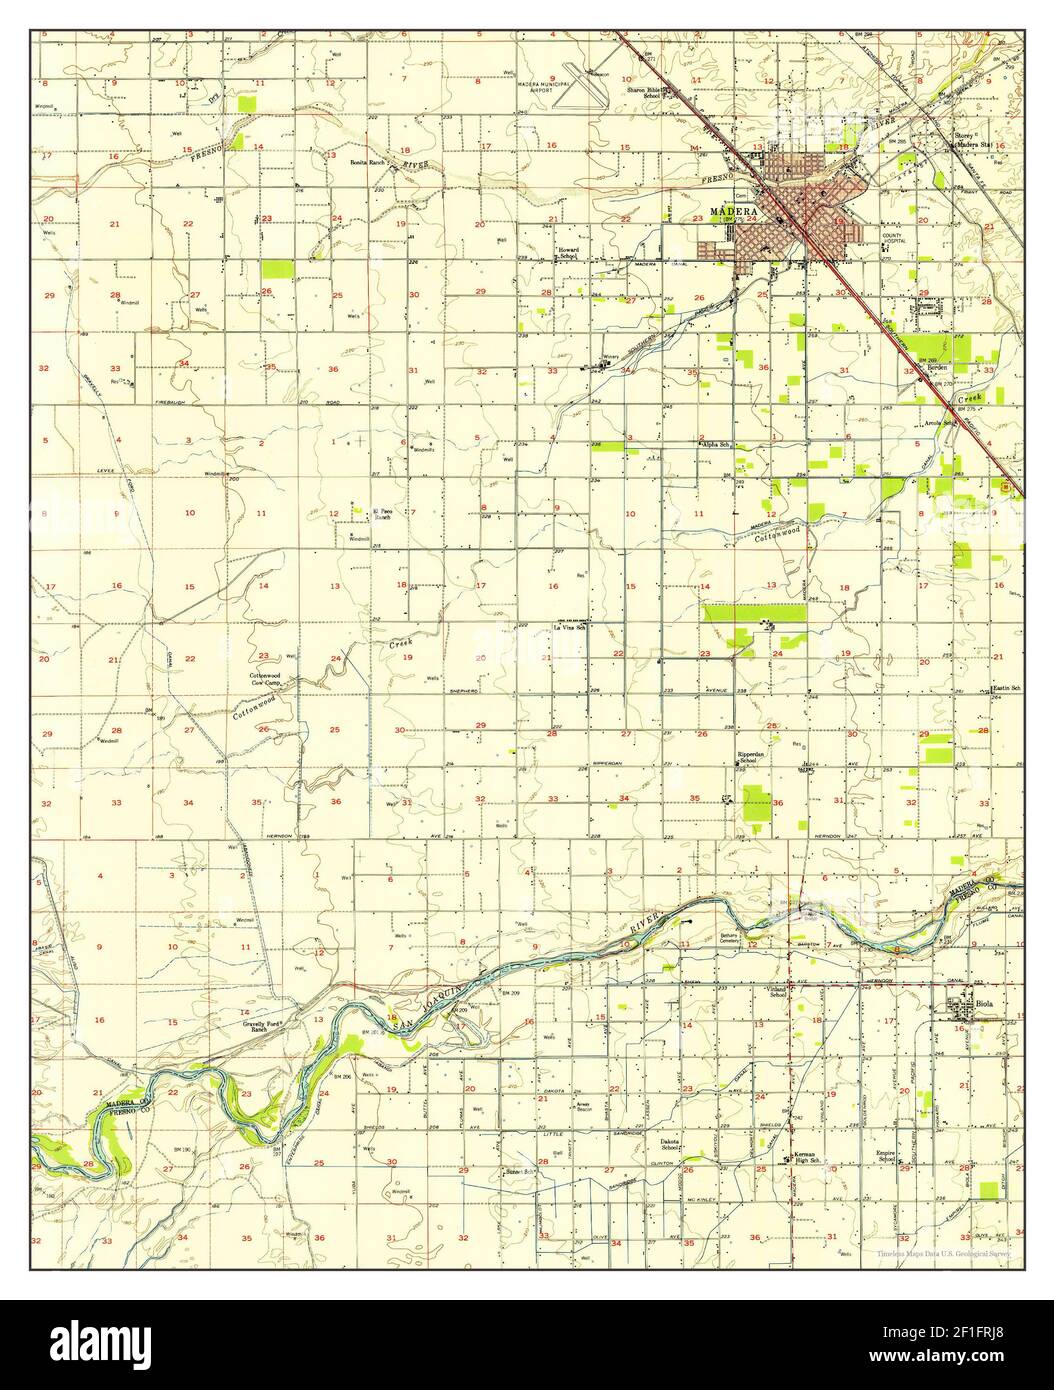 Madera, California, map 1946, 1:62500, United States of America by Timeless Maps, data U.S. Geological Survey Stock Photo